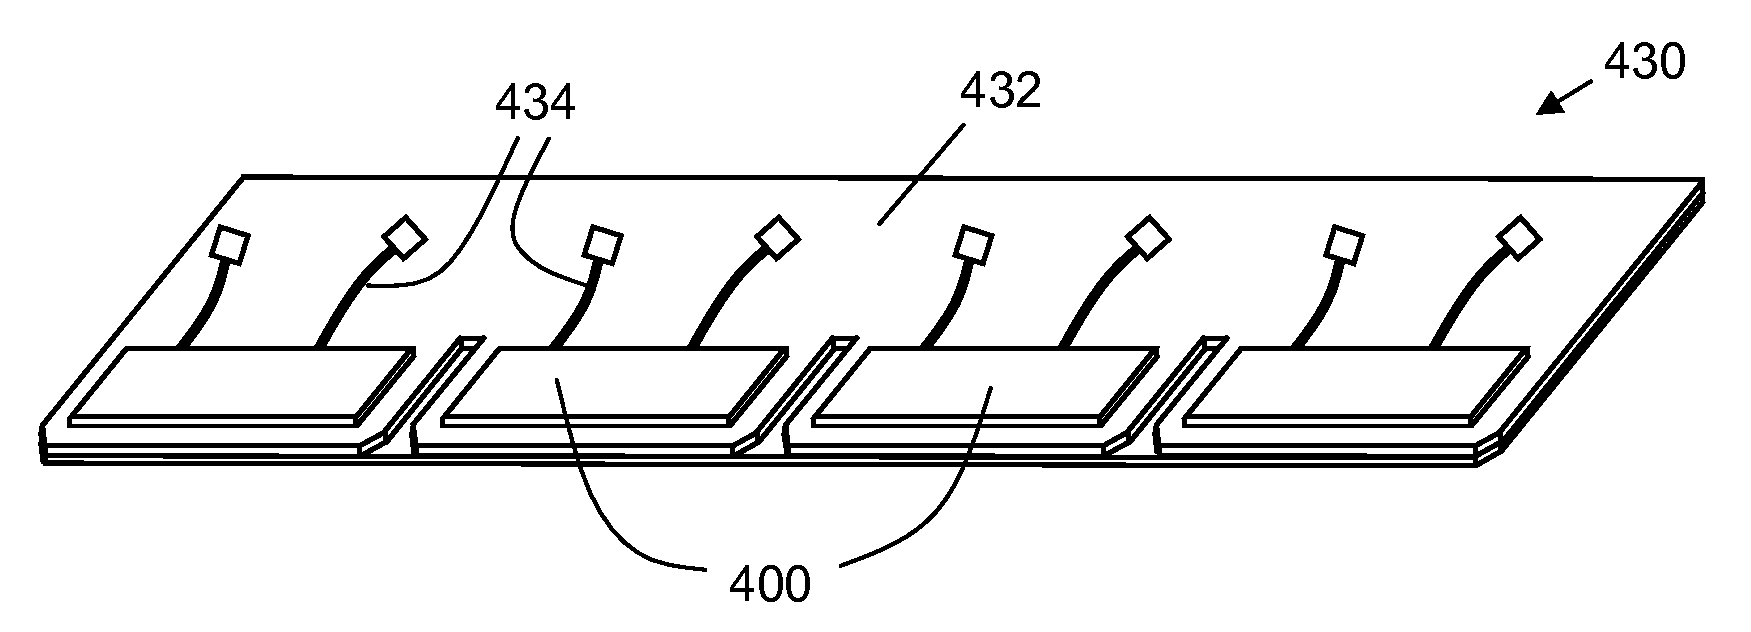 Photovoltaic Devices and Photovoltaic Roofing Elements Including Granules, and Roofs Using Them